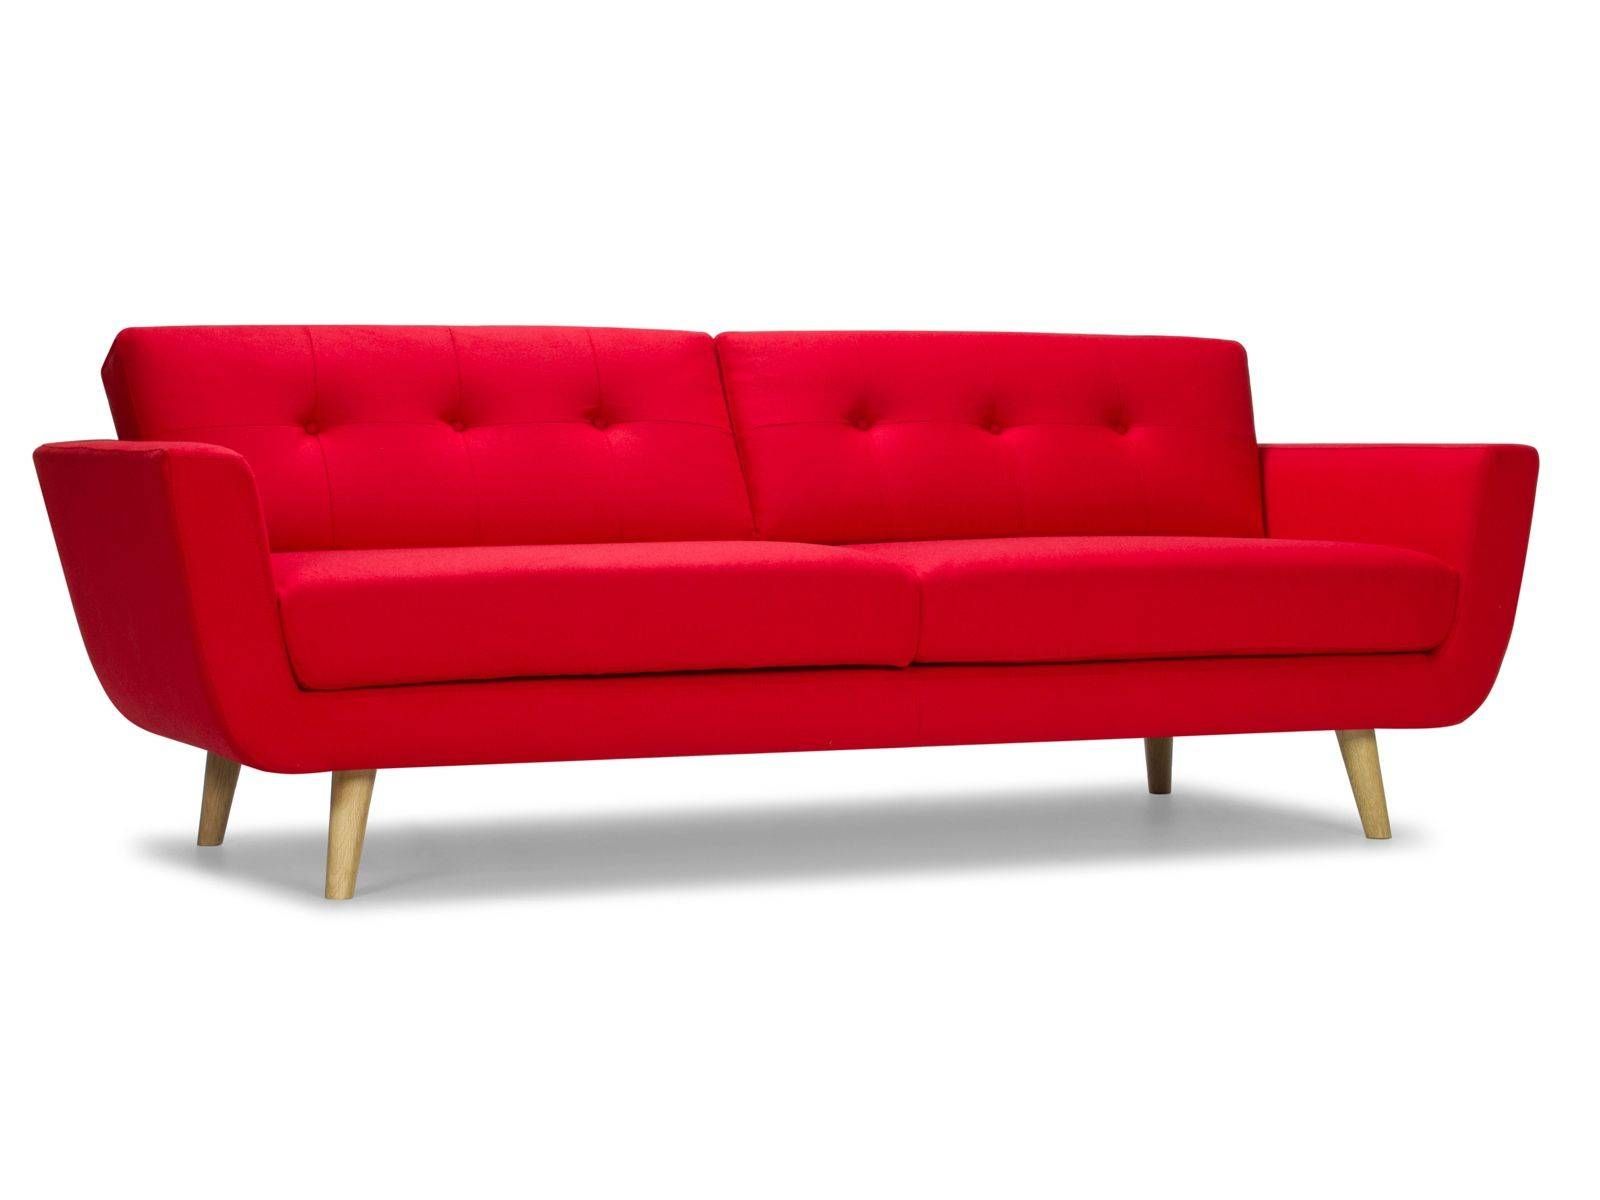 Belfast 3 Seater Retro Sofa | Real Grown Up Furniture | Pinterest Pertaining To Cheap Retro Sofas (View 11 of 30)